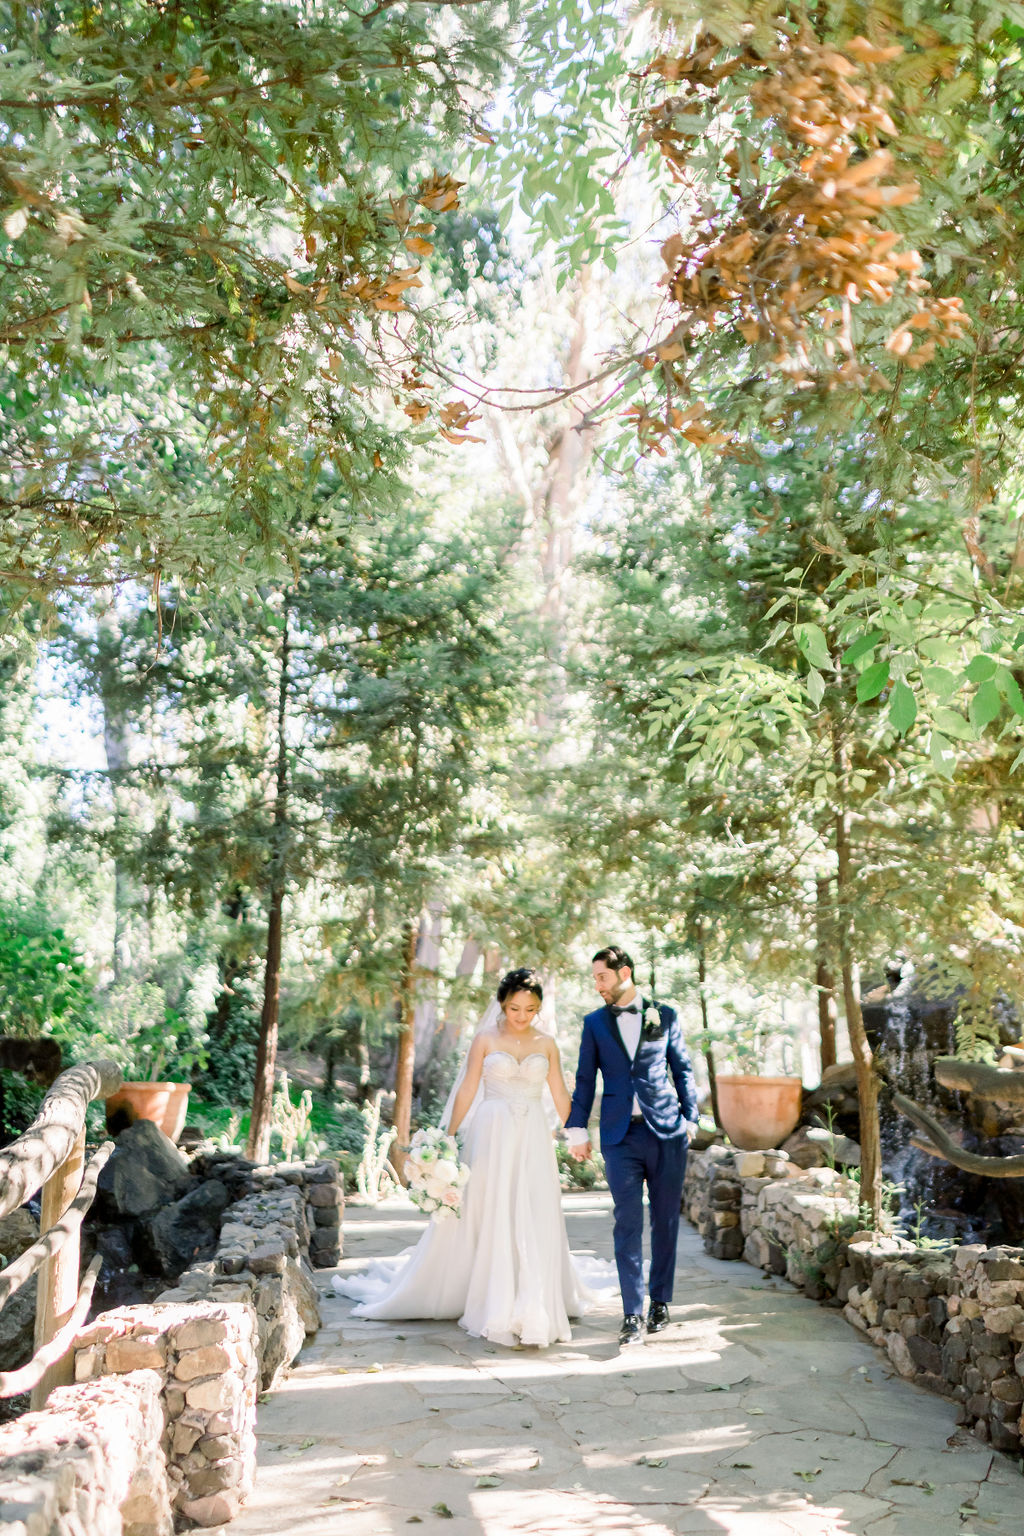 groom with paisley detail bowtie and blue tuxedo stands with bride in embellished chiffon strapless wedding dress at Calamigos Ranch